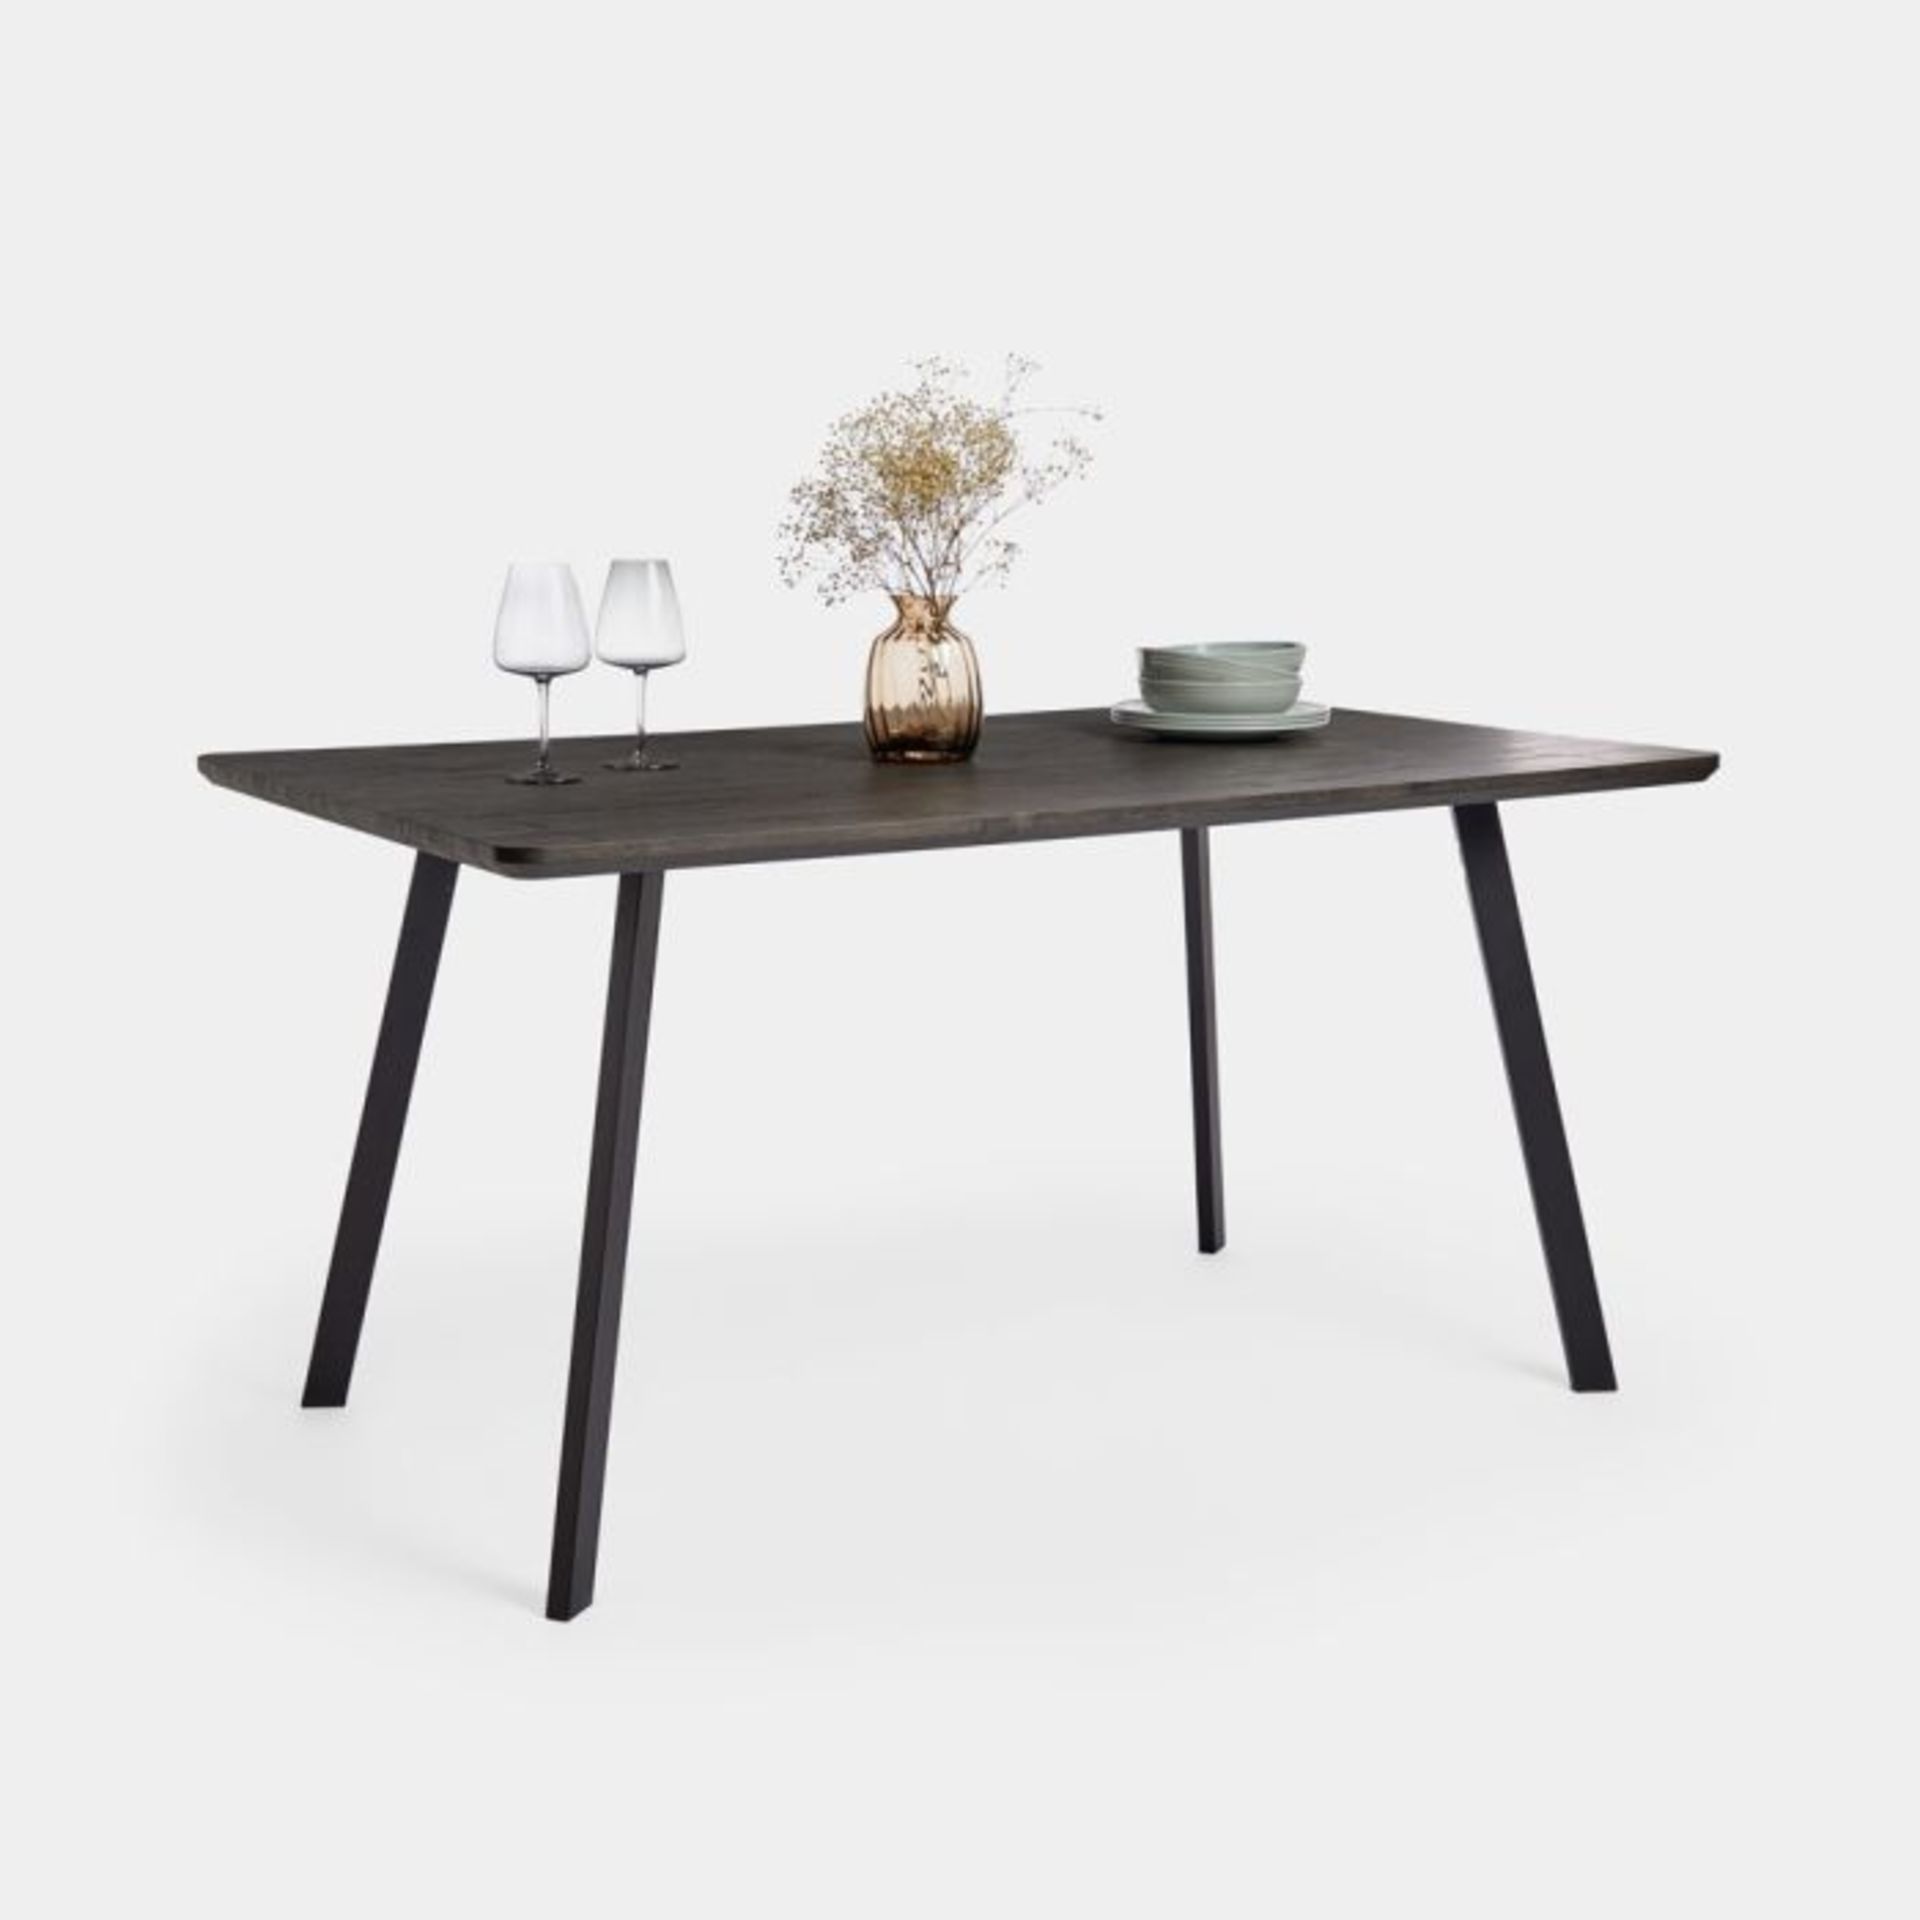 Burton 6 Seater Dining Table. - S2. The table’s dark wood coloured surface is elegantly supported by